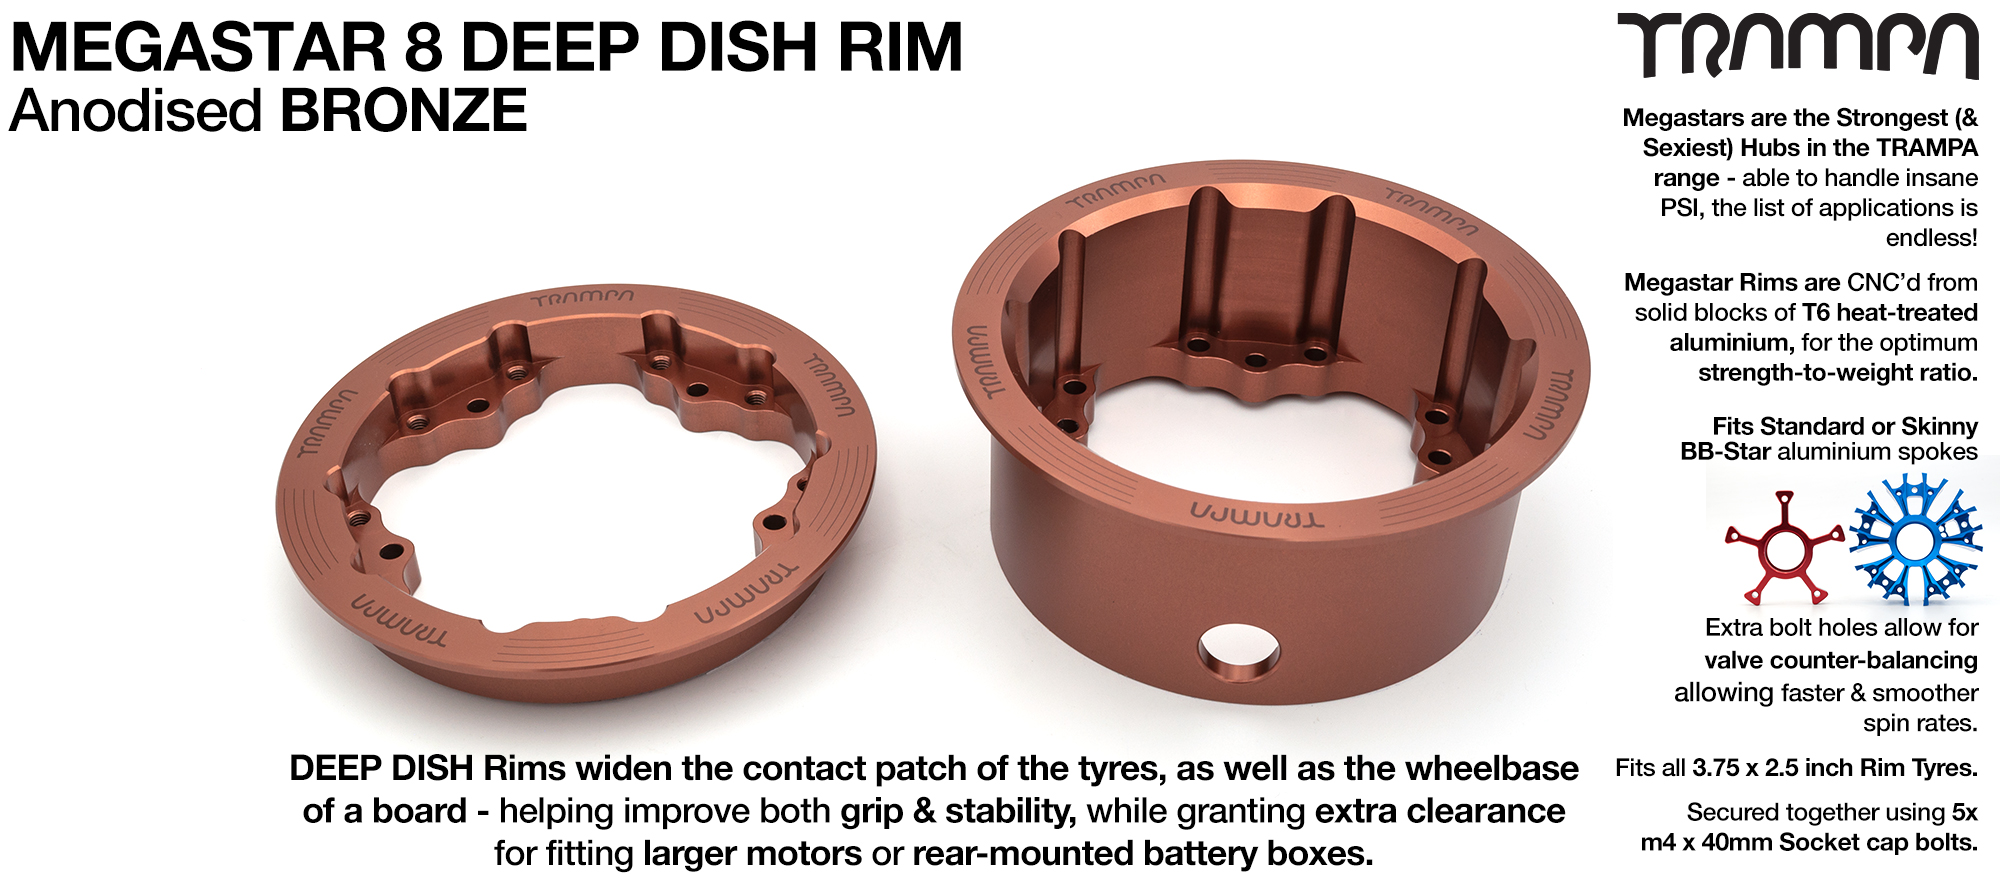 MEGASTAR 8 DEEP-DISH Rims Measure 3.75 x 2.5 Inch. The bearings are positioned OFF-SET widening the wheel base & accept all 3.75 Rim Tyres - BRONZE